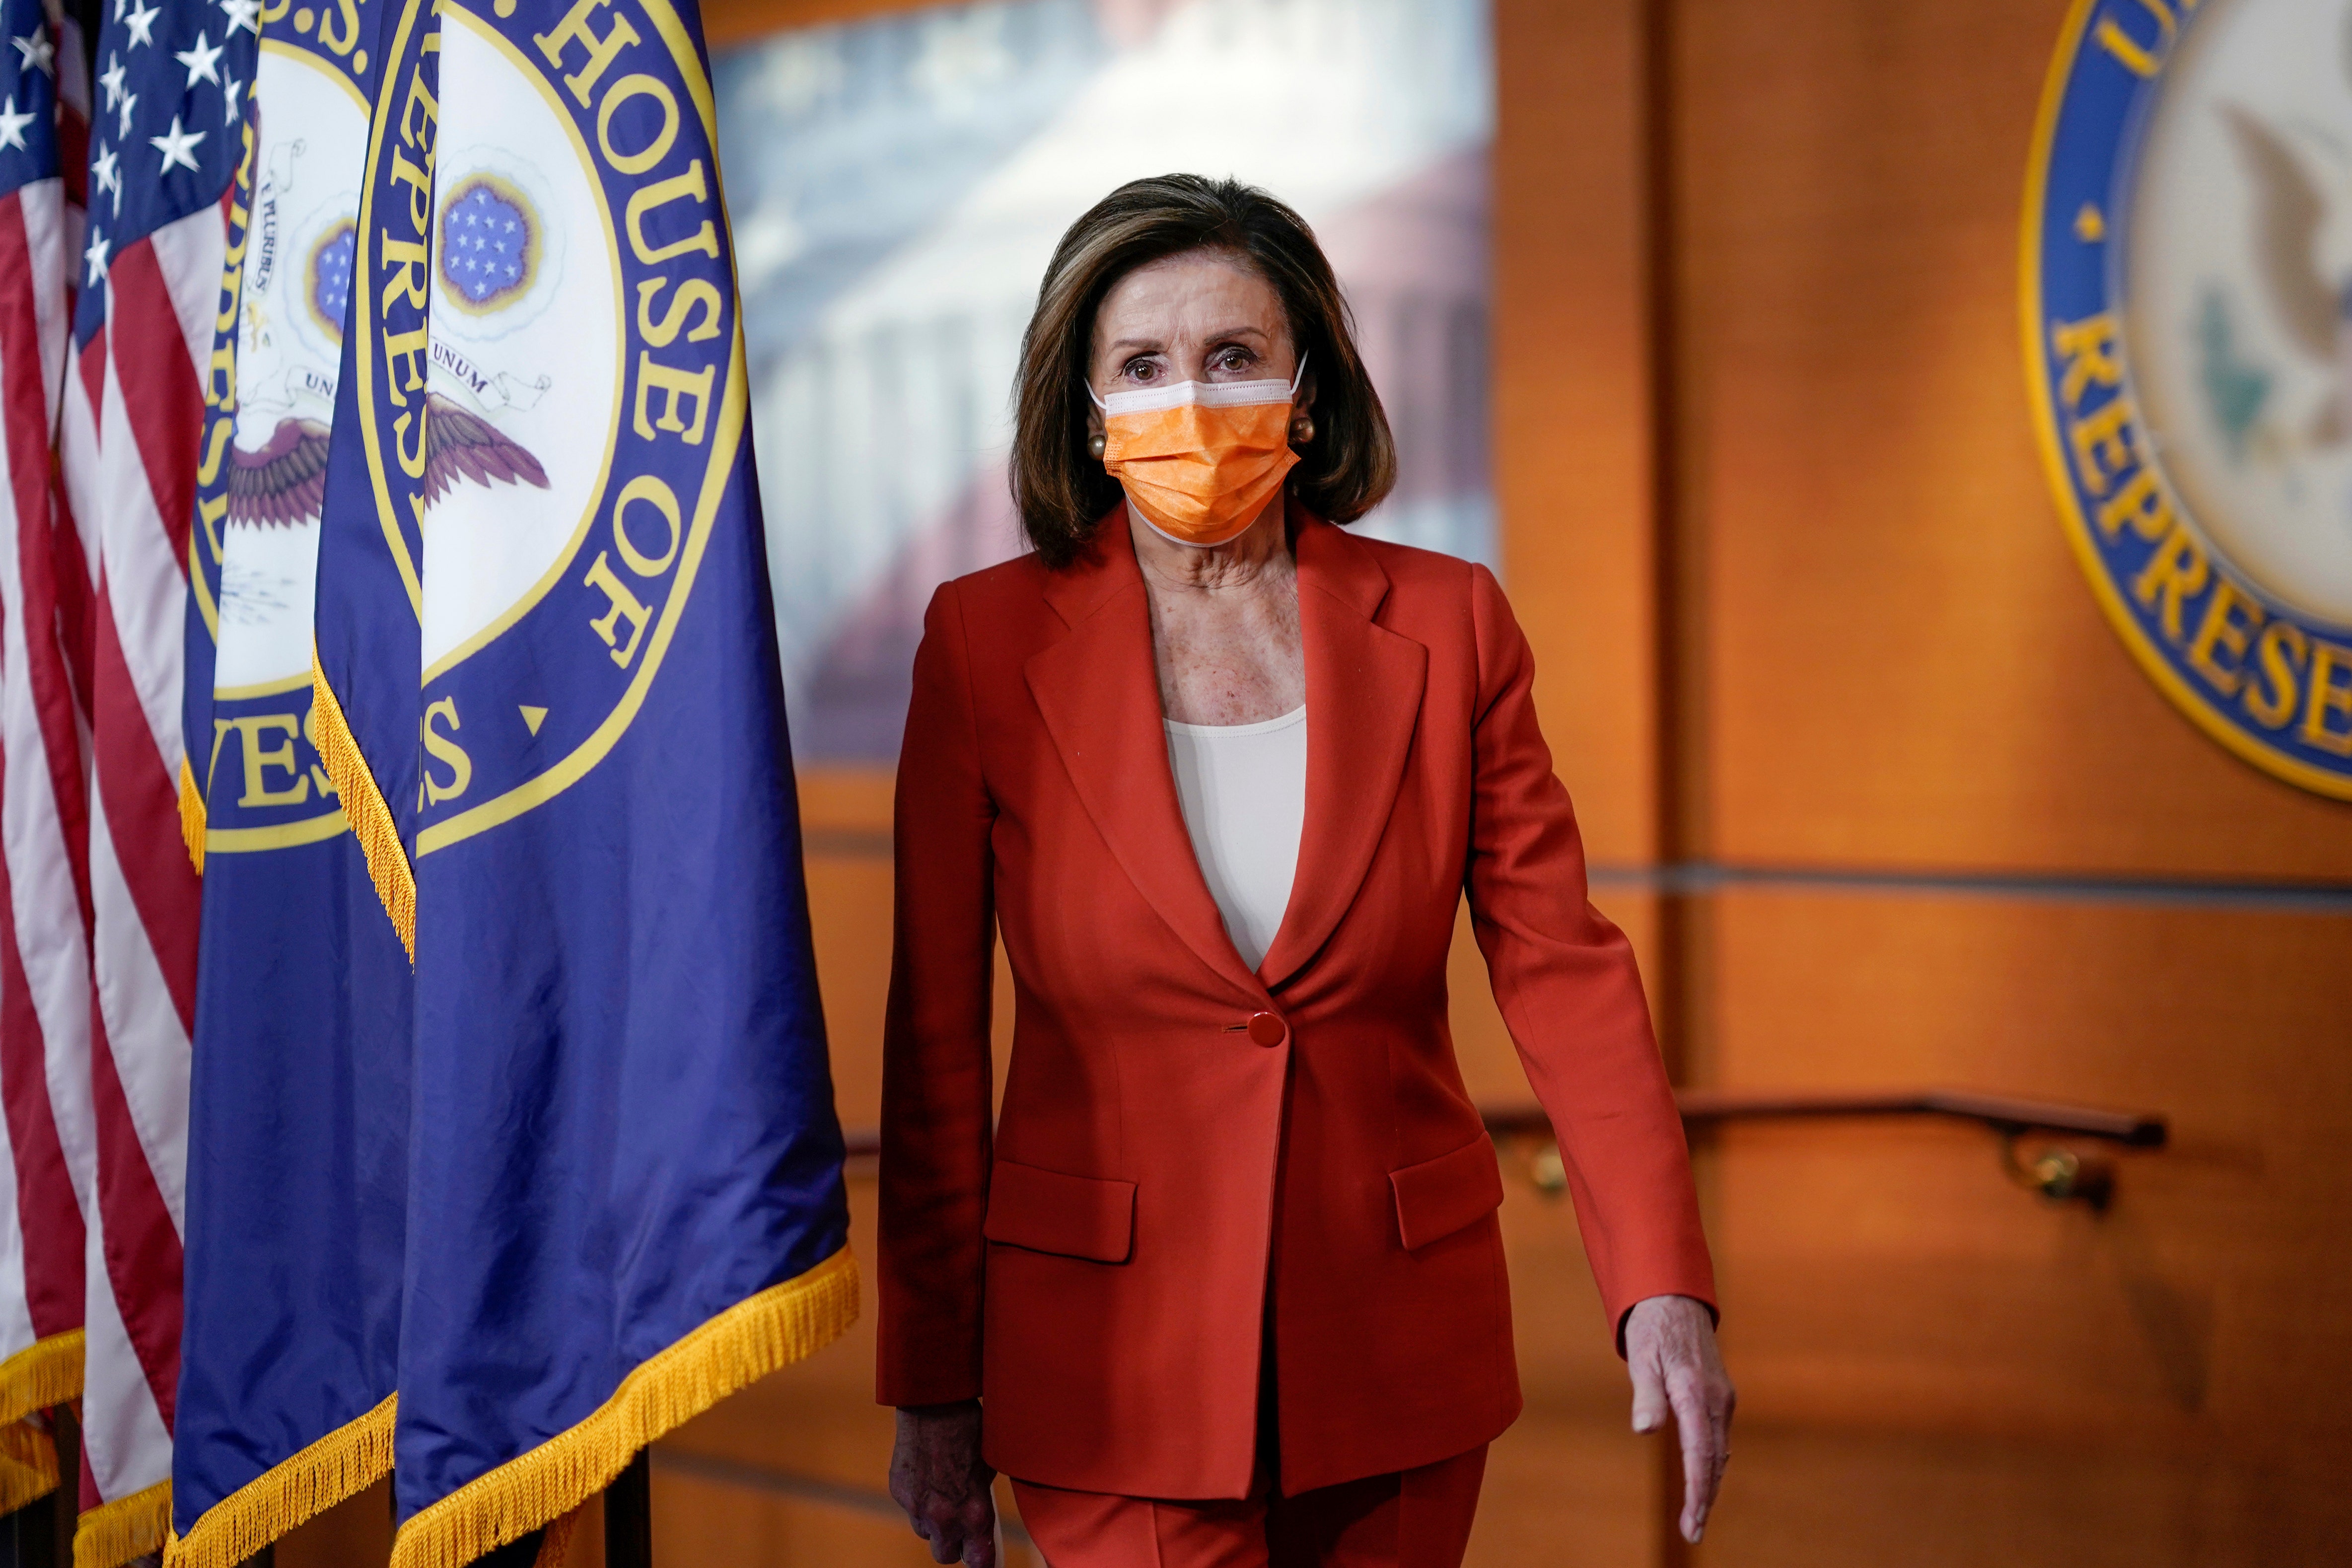 Pelosi blames Donald Trump for ‘humanitarian challenge’ at the border, inheritance of the ‘broken system’